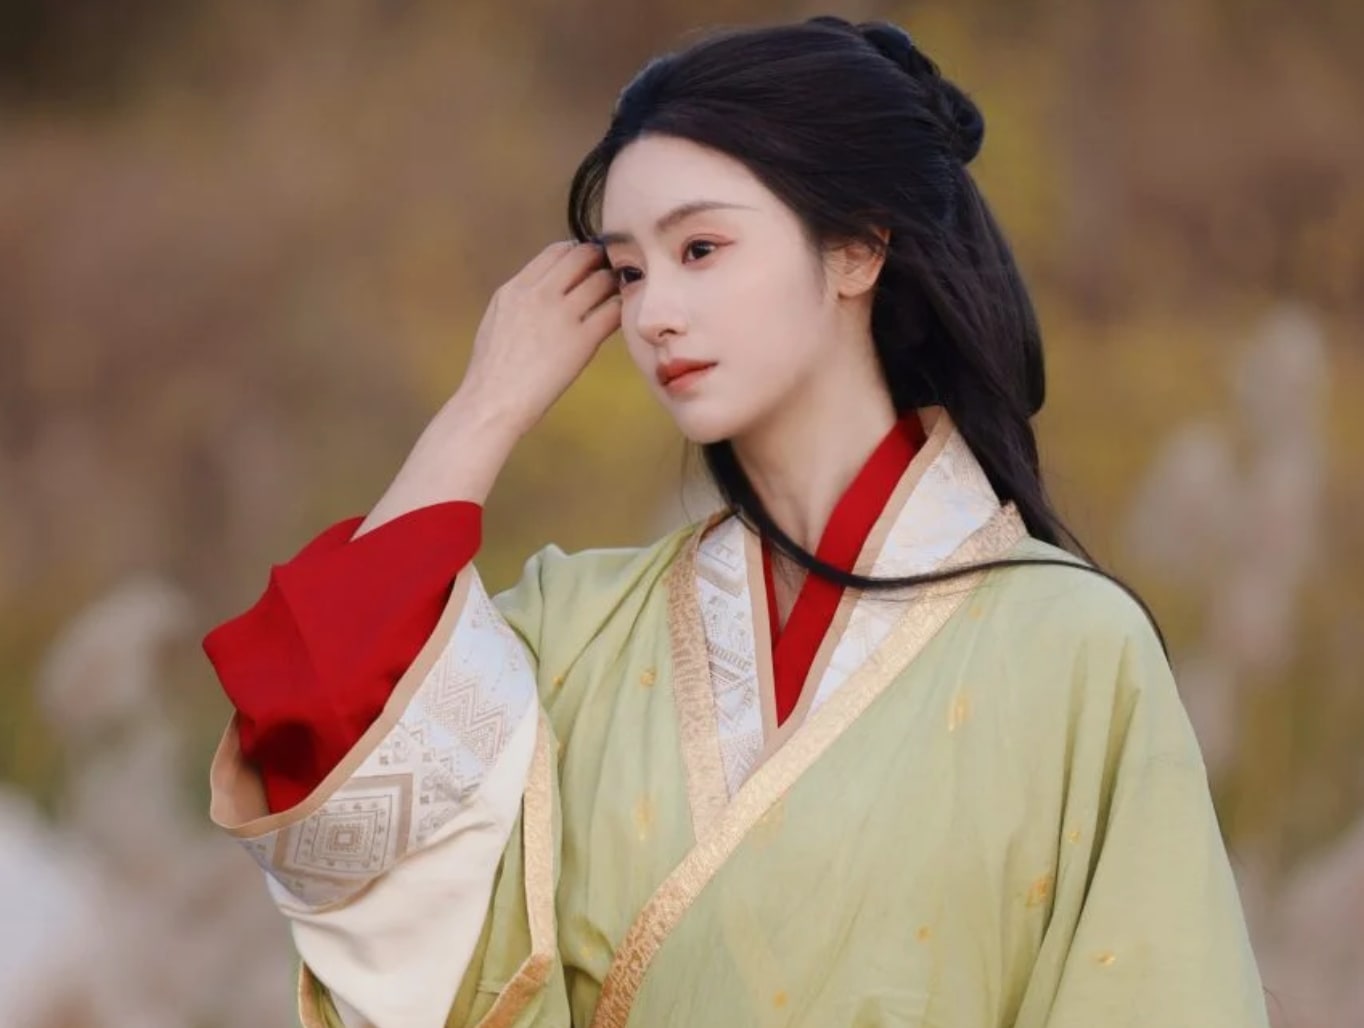 Chinese Actress Apologises For Being 